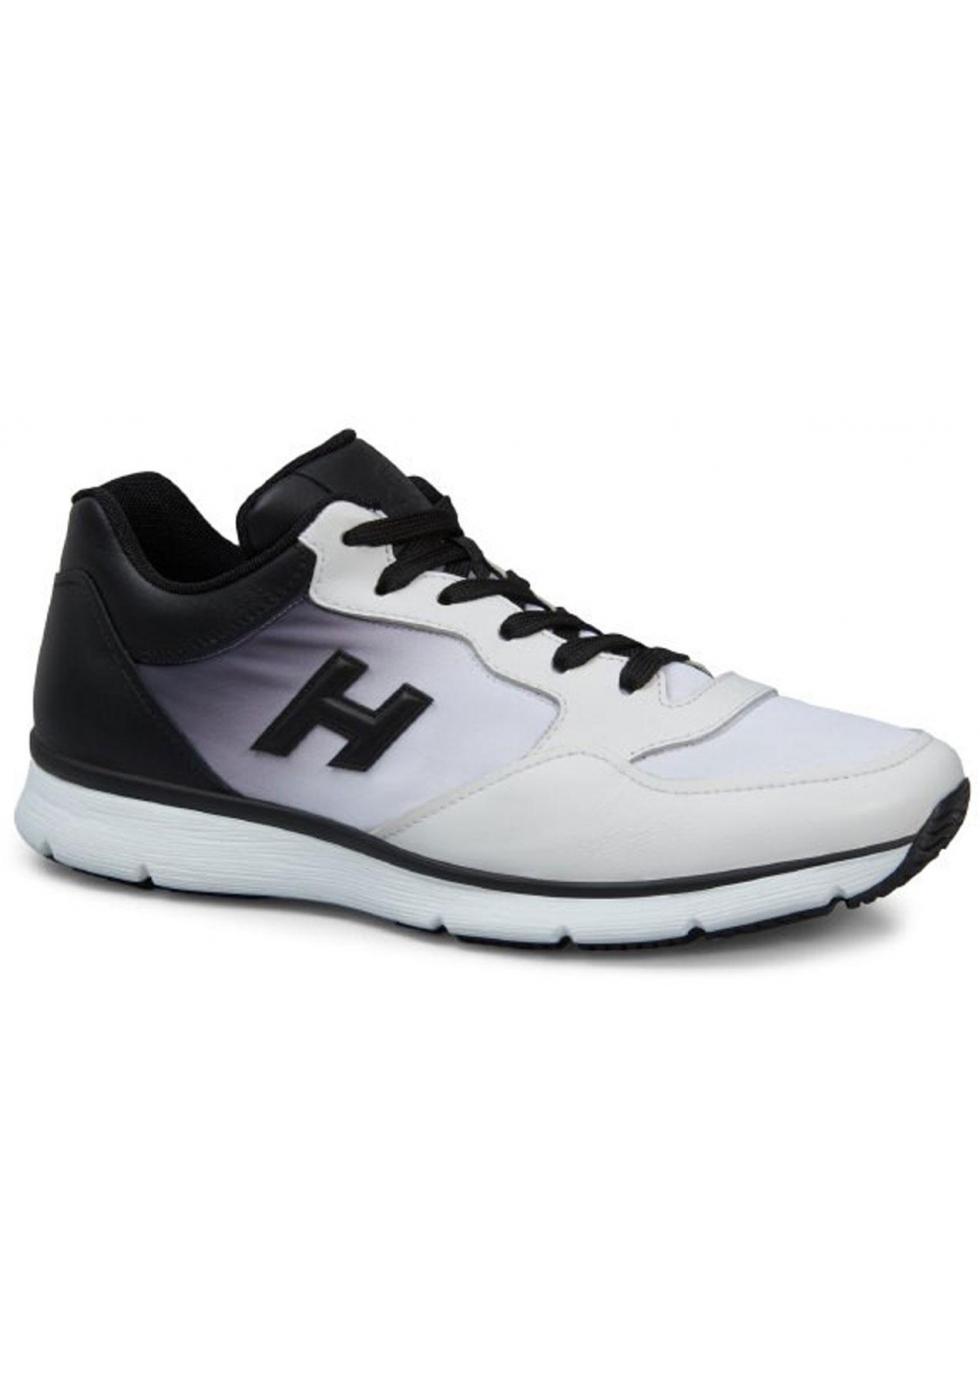 Hogan sneakers in white leather with black gradation - Italian Boutique